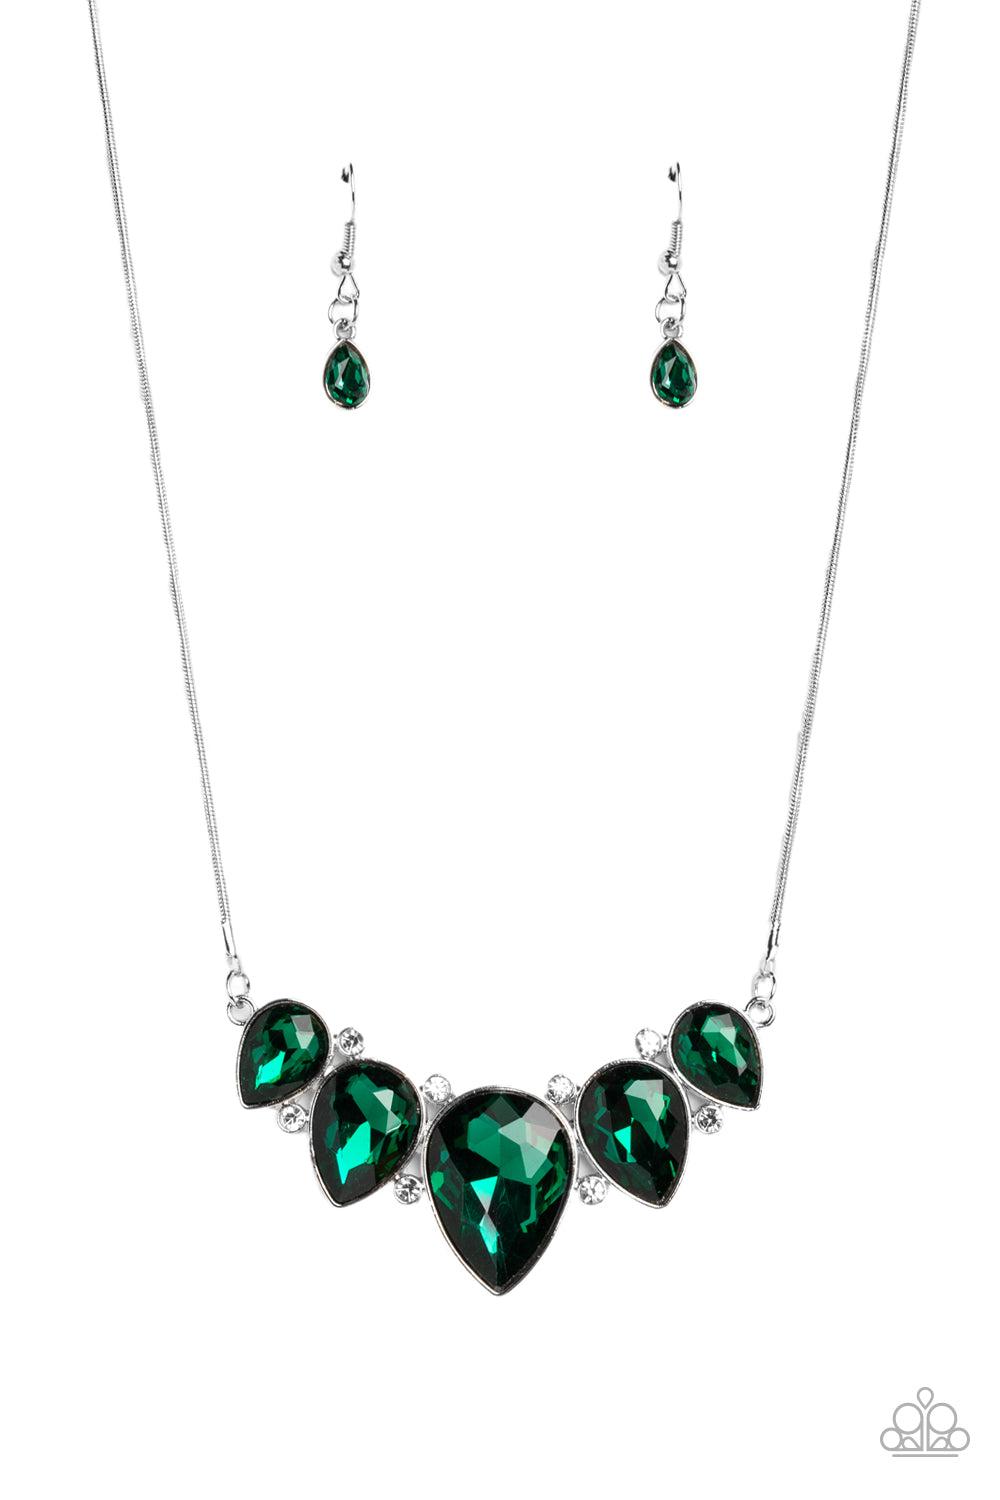 Regally Refined Green Rhinestone Necklace - Paparazzi Accessories- lightbox - CarasShop.com - $5 Jewelry by Cara Jewels